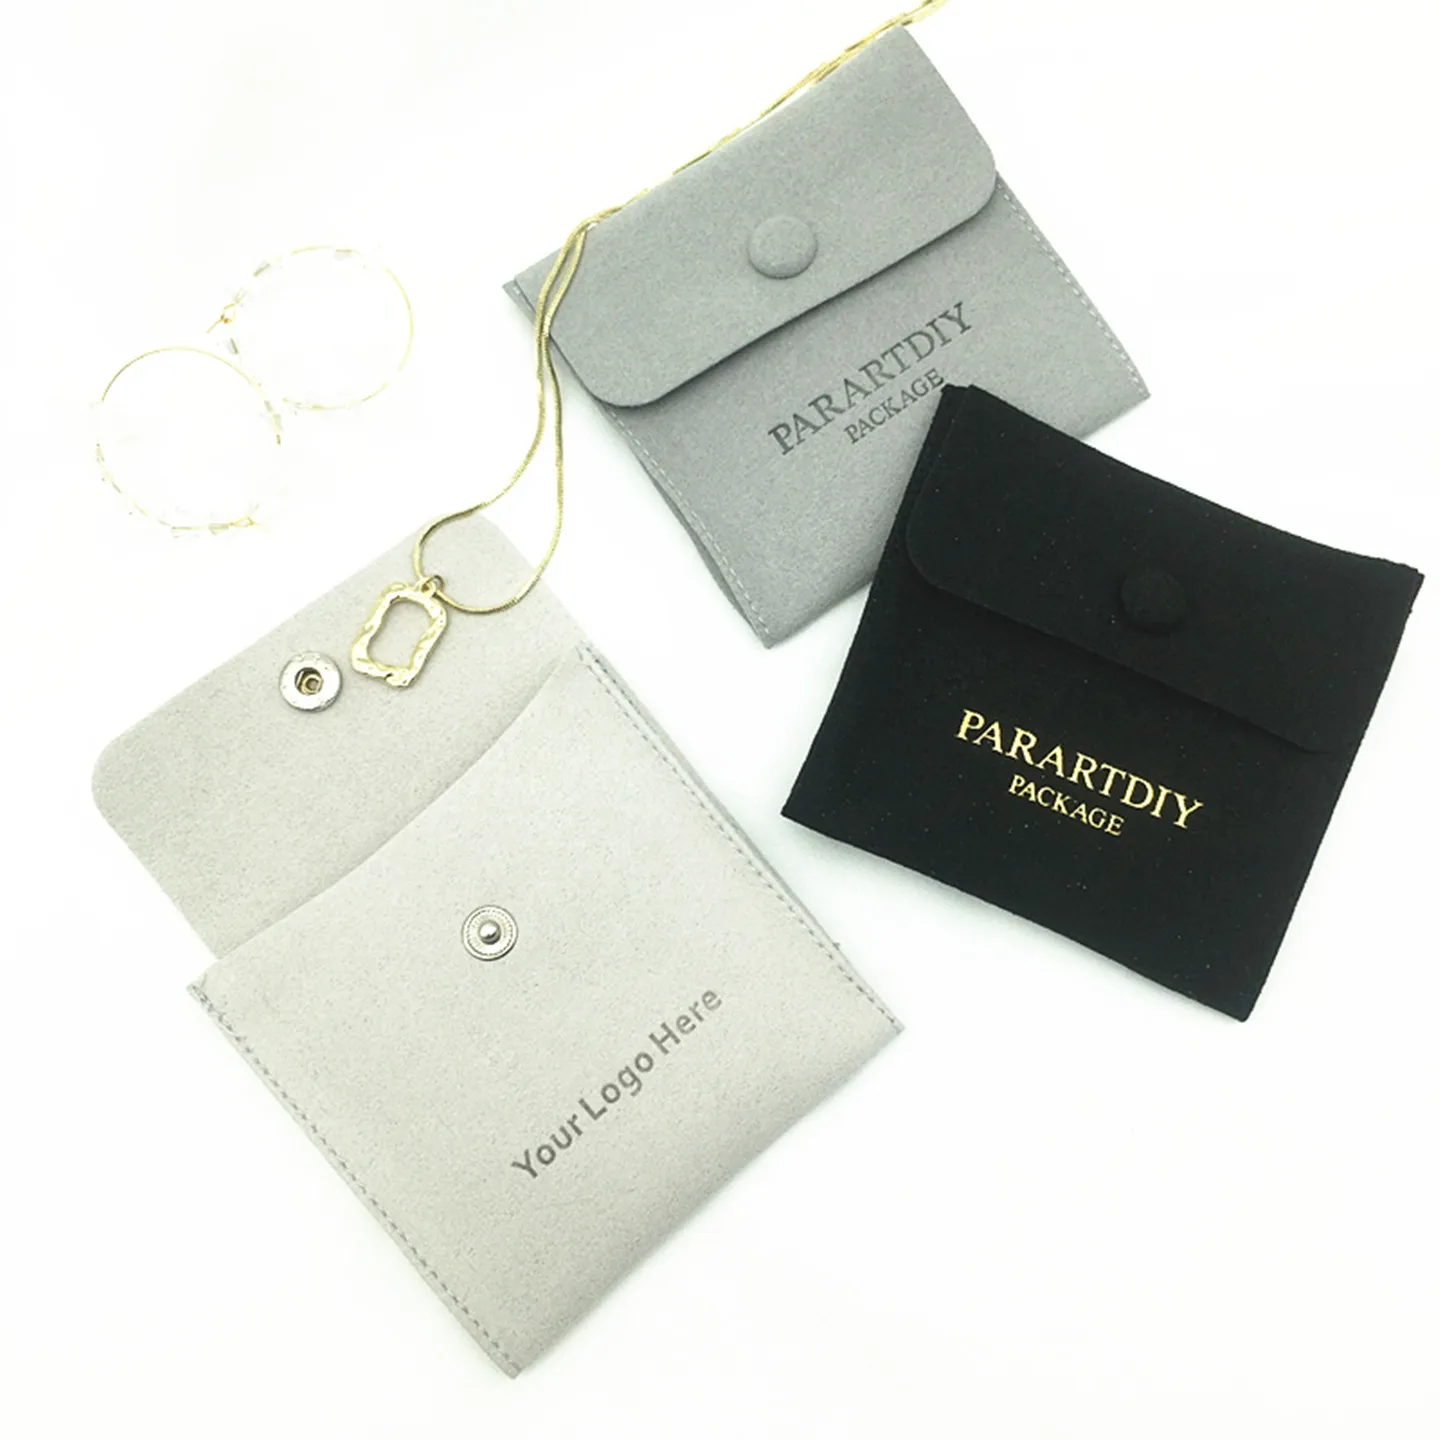 50pcs Light Gray personalized jewelry packaging pouch custom logo envelope bag chic small microfiber pouch